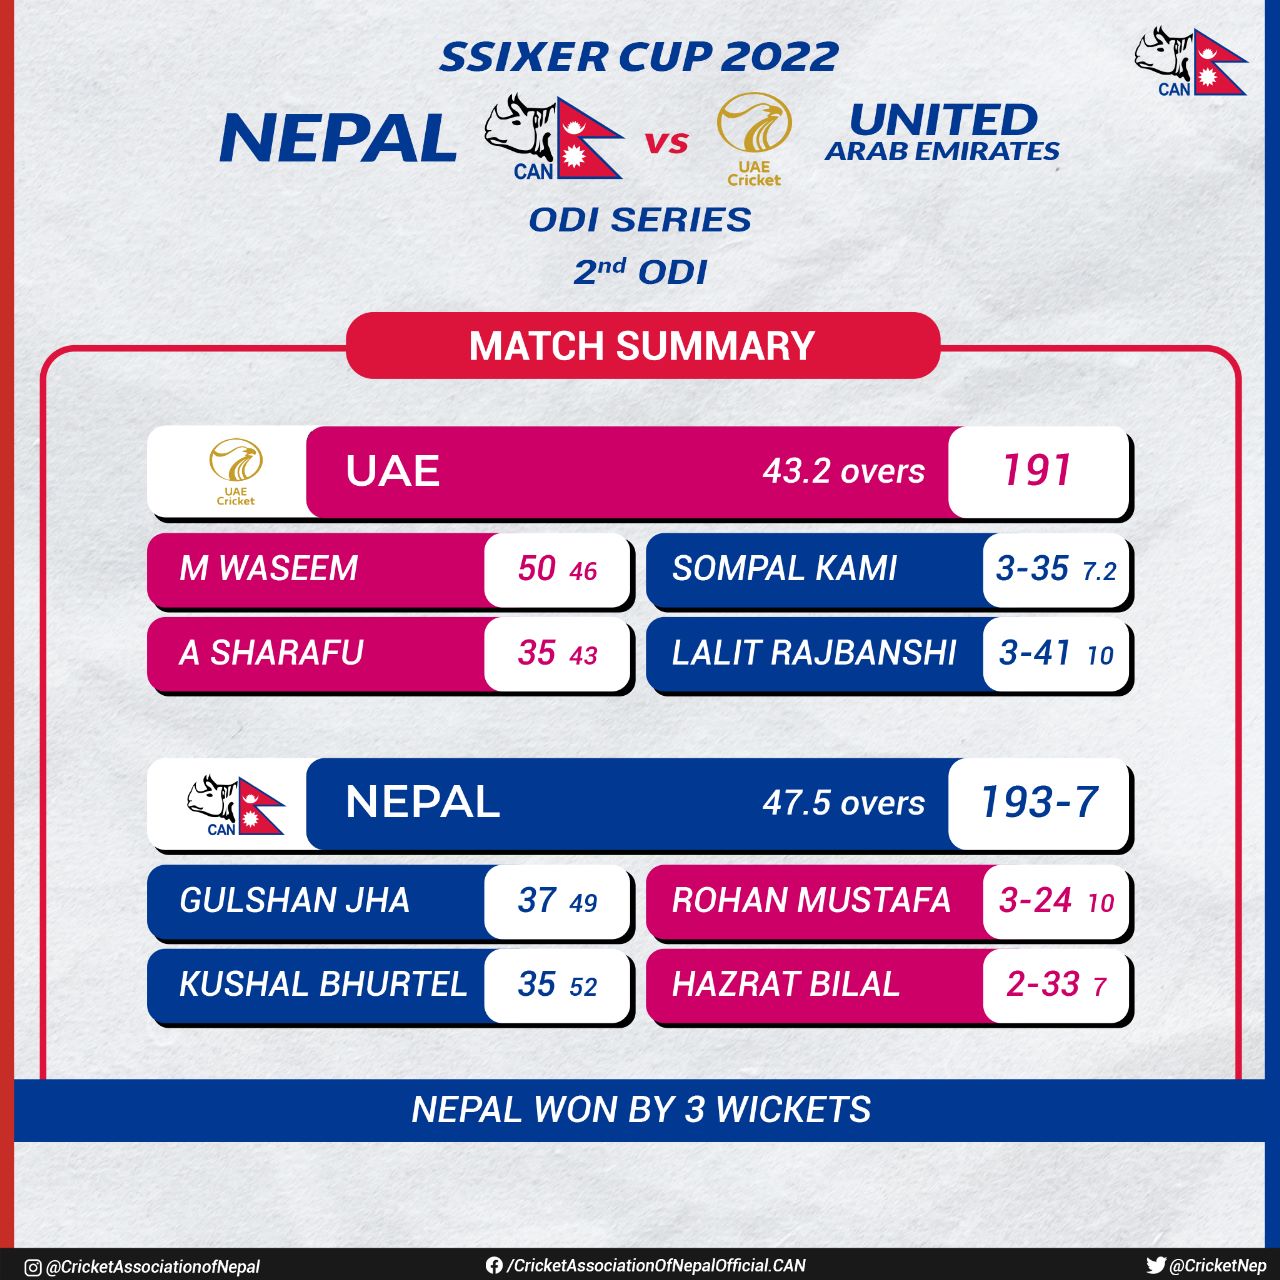 Nepal defeats UAE by 3 wickets, levels the series at 1-1